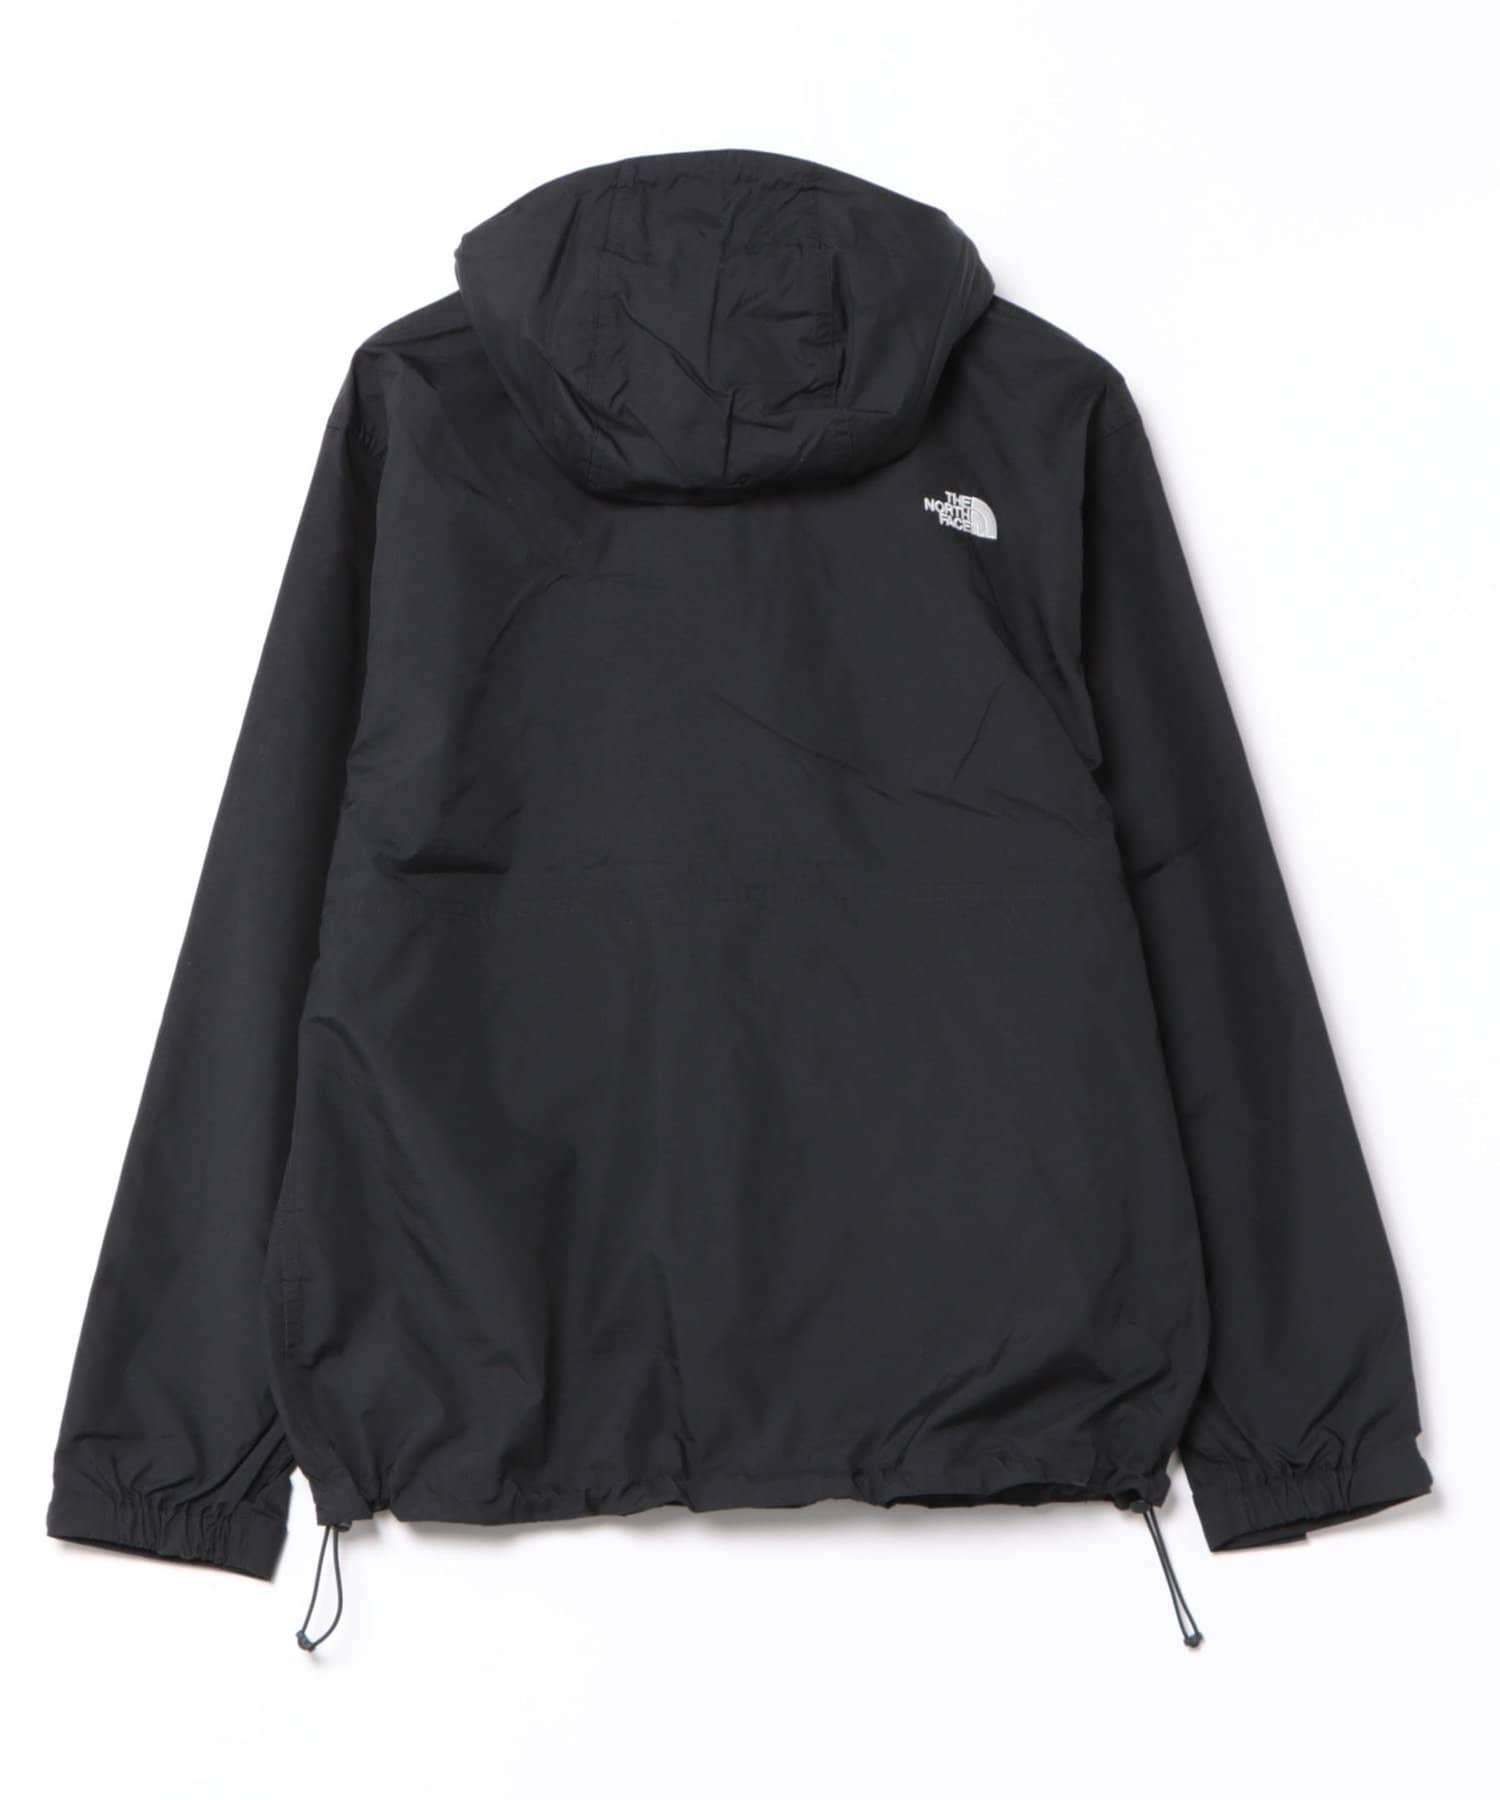 CIAOPANIC TYPY(チャオパニックティピー) 【WEB限定】【THE NORTH FACE】COMPACT ANORAK JACKET